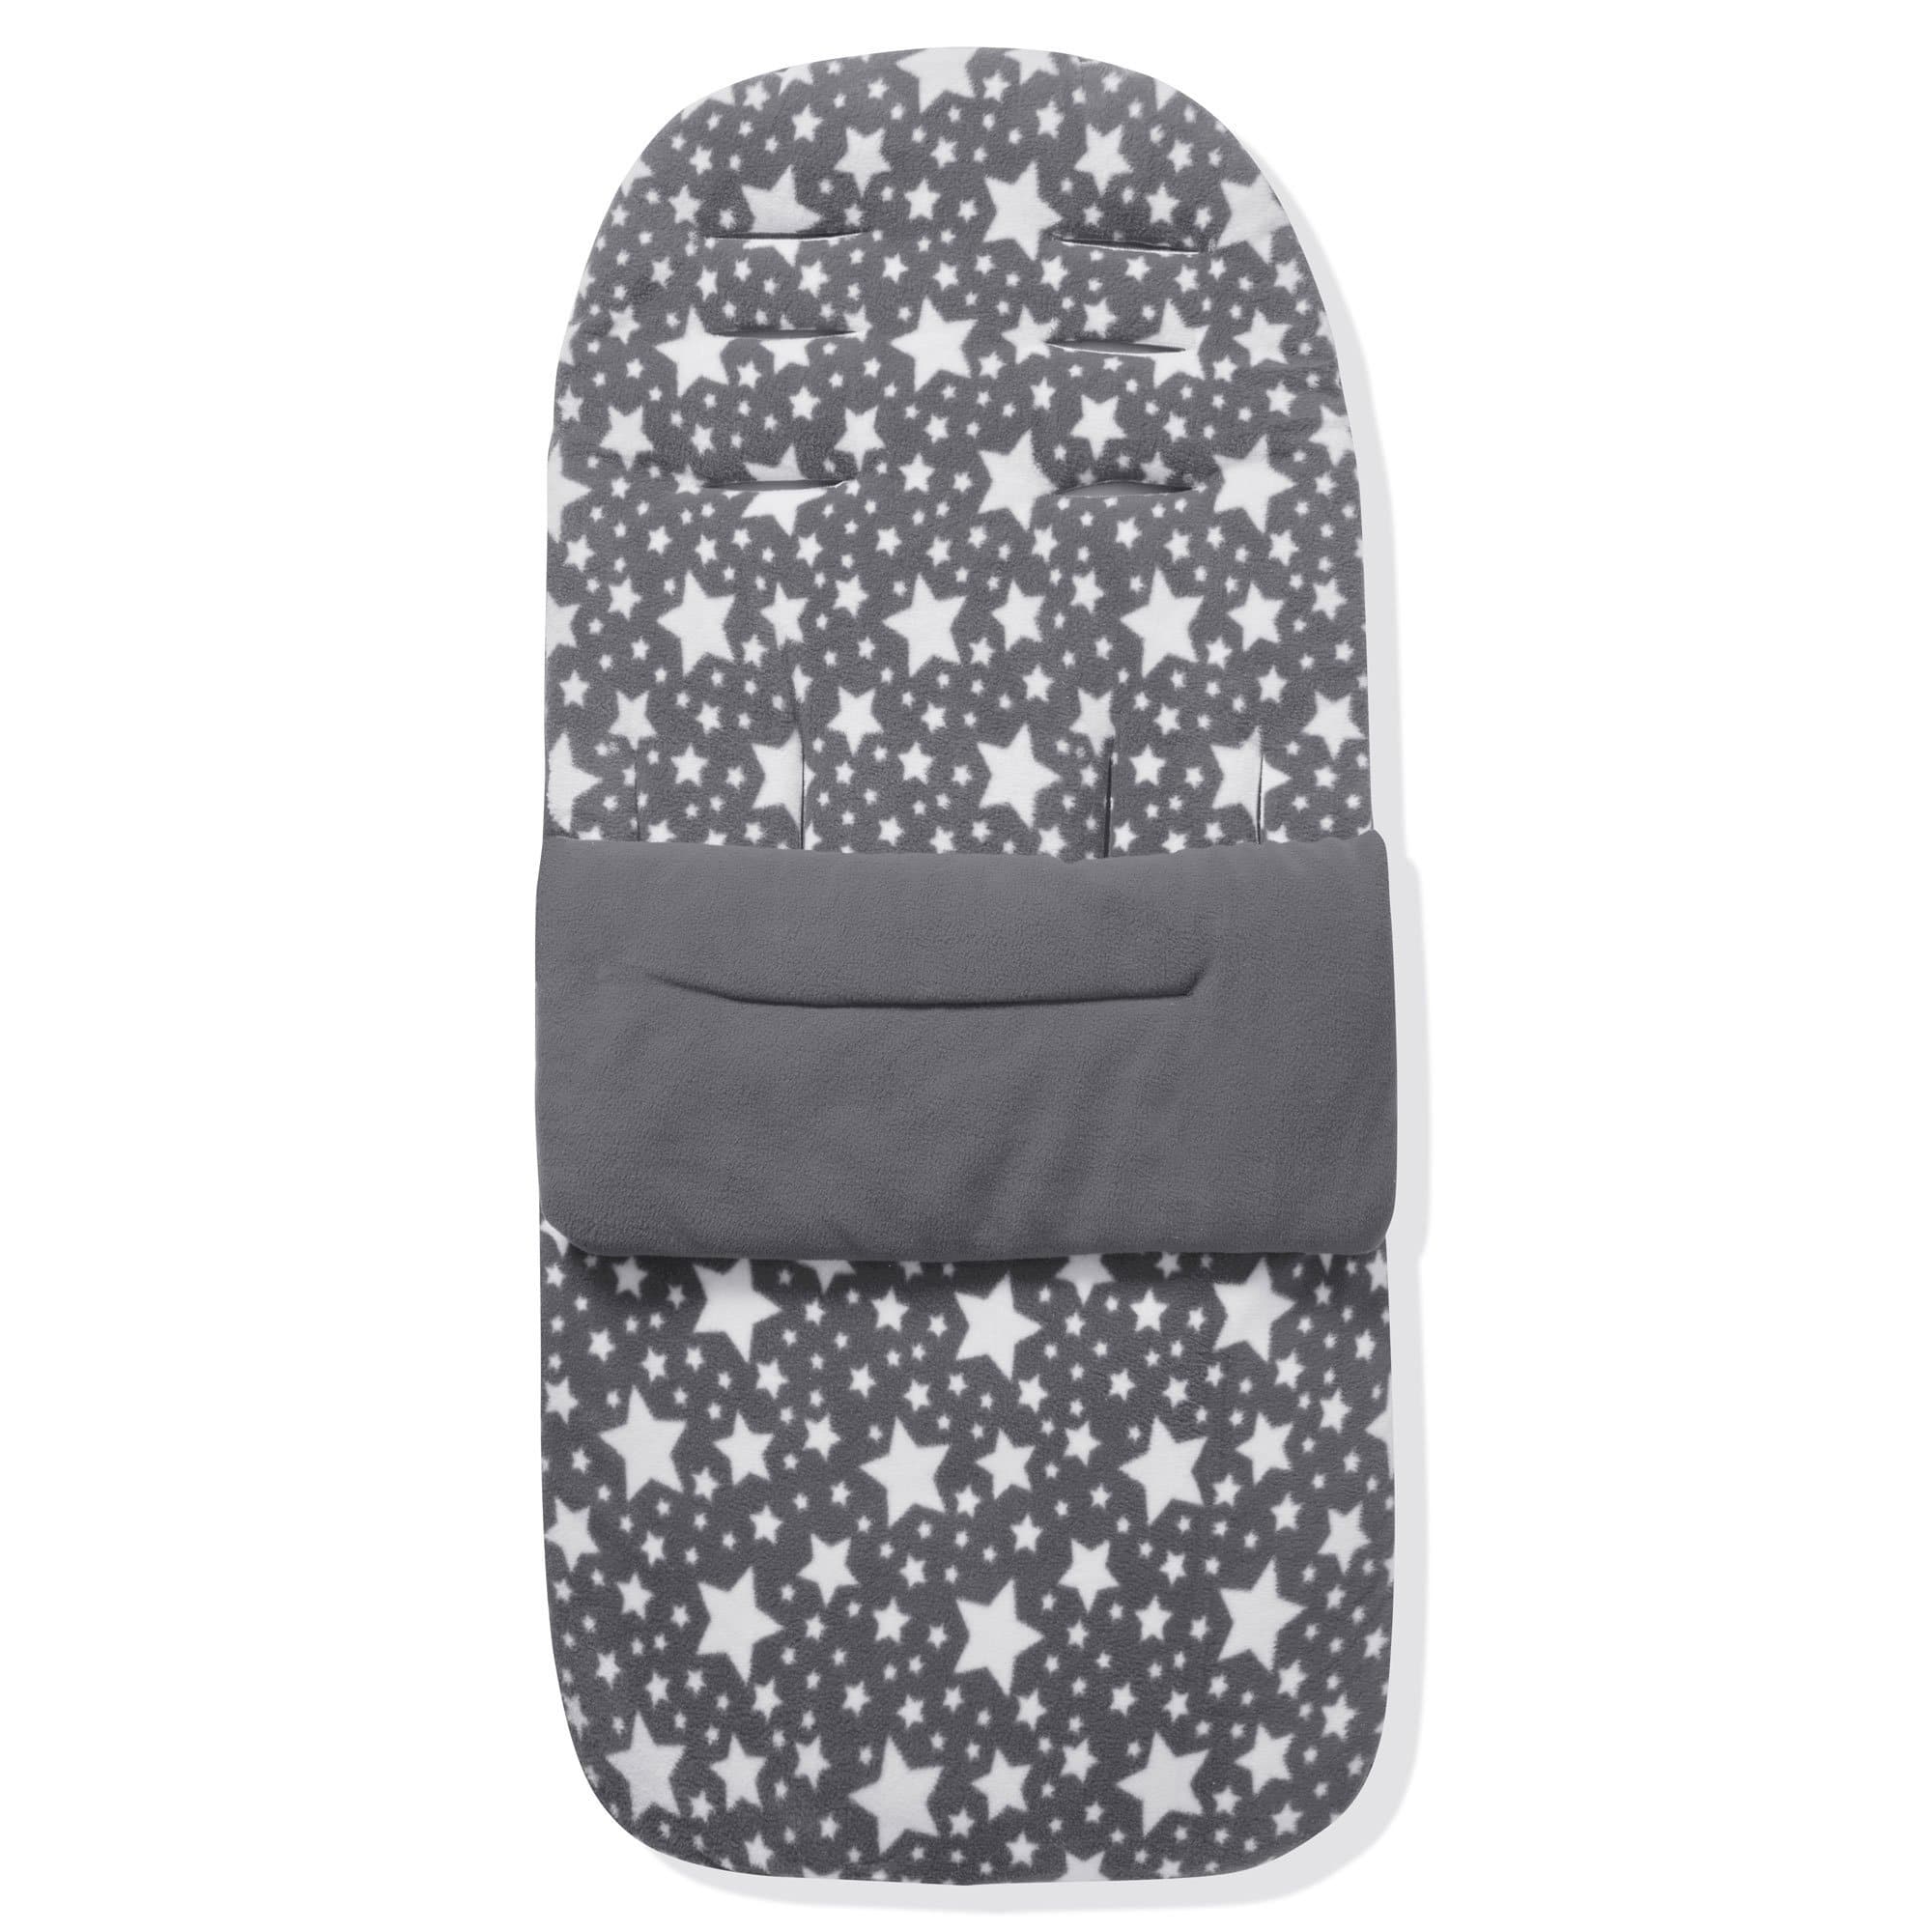 Fleece Footmuff / Cosy Toes Compatible with Uppababy - Grey Star / Fits All Models | For Your Little One